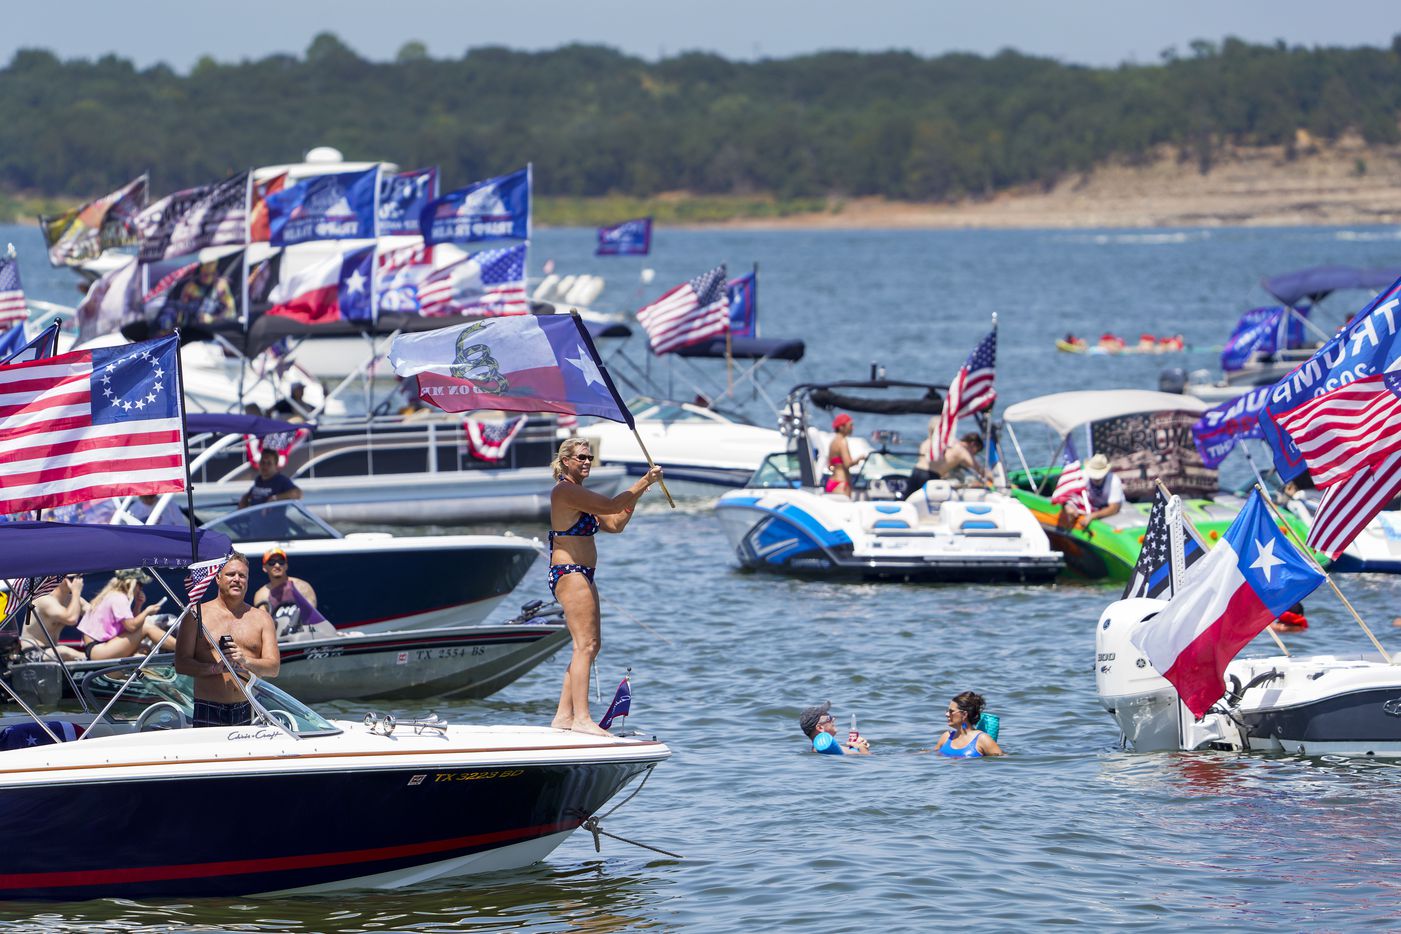 Supporters of President Donald Trump attend a campaign rally and boat parade at Oak Grove Park on Grapevine Lake on Saturday, Aug. 15, 2020.